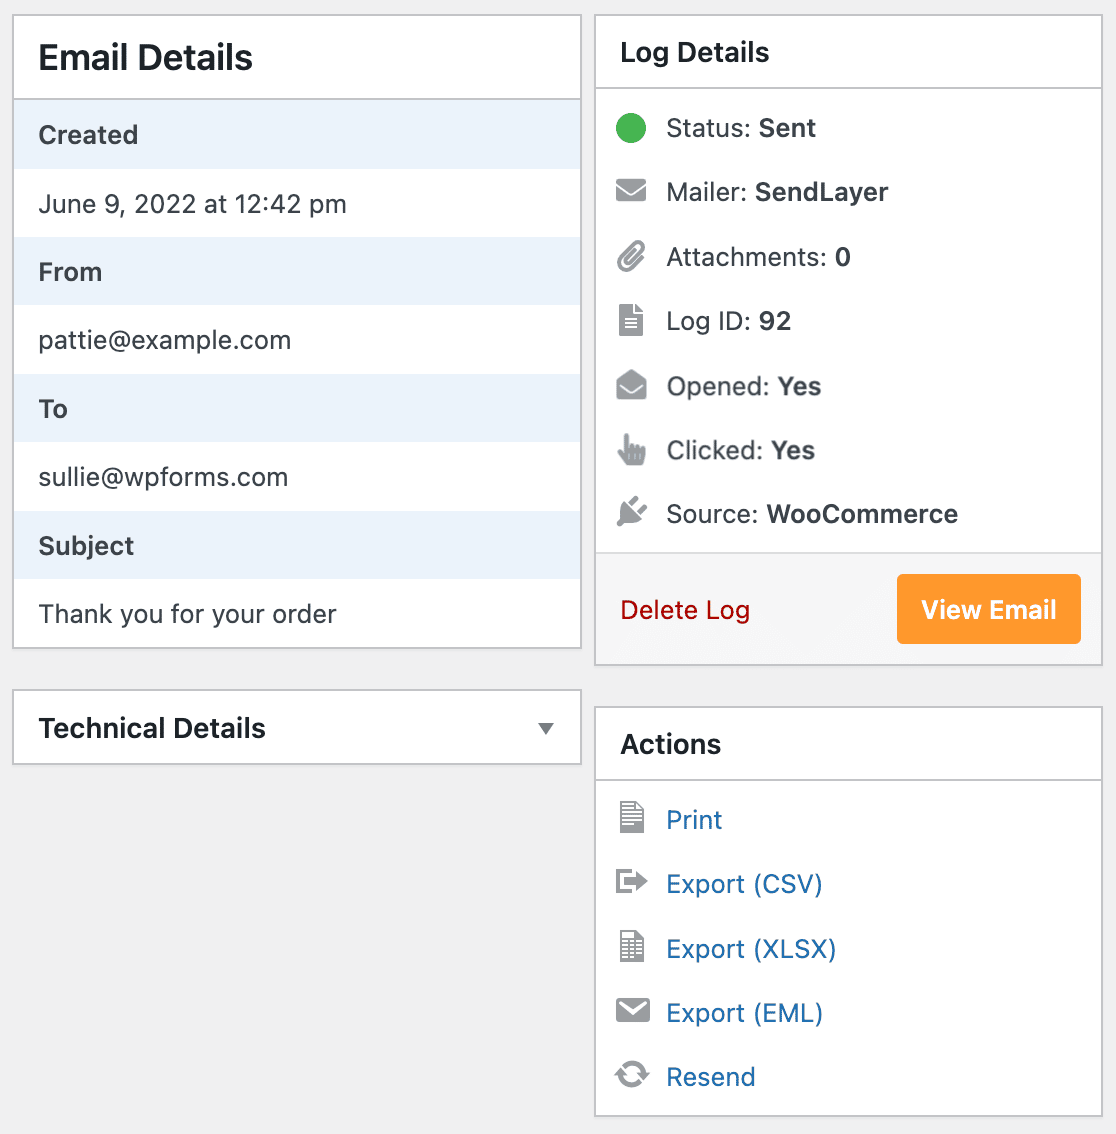 The Email Details page for a WooCommerce email